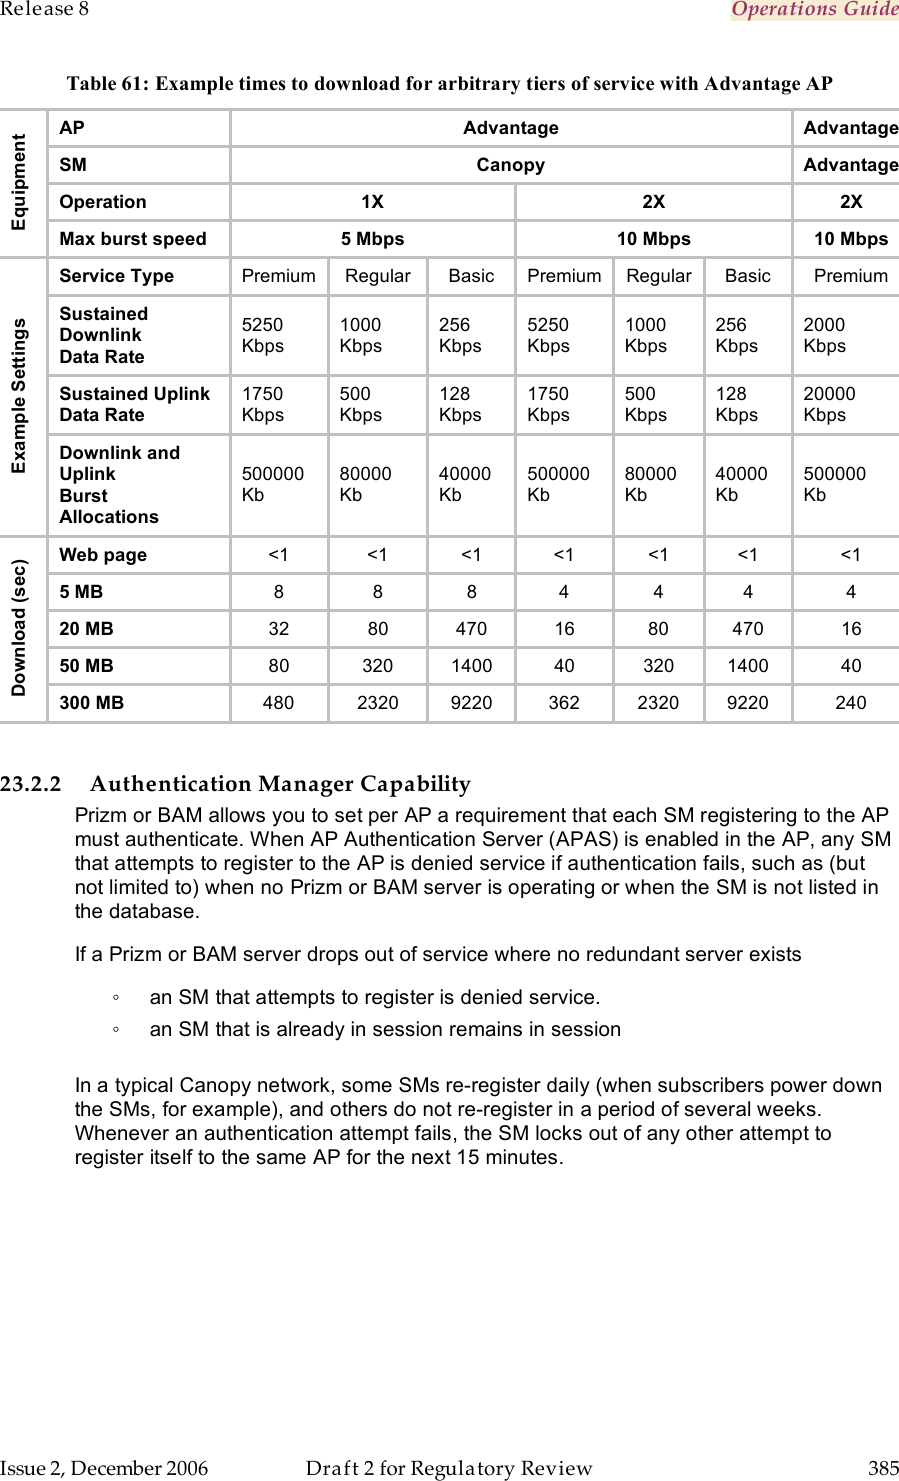 Release 8    Operations Guide   Issue 2, December 2006  Draft 2 for Regulatory Review  385     Table 61: Example times to download for arbitrary tiers of service with Advantage AP AP Advantage Advantage SM Canopy Advantage Operation 1X 2X 2X Equipment Max burst speed  5 Mbps 10 Mbps 10 Mbps Service Type Premium Regular Basic Premium Regular Basic Premium Sustained Downlink Data Rate 5250 Kbps 1000 Kbps 256 Kbps 5250 Kbps 1000 Kbps 256 Kbps 2000 Kbps Sustained Uplink Data Rate  1750  Kbps 500  Kbps 128  Kbps 1750  Kbps 500  Kbps 128  Kbps 20000 Kbps Example Settings Downlink and Uplink Burst  Allocations 500000 Kb 80000 Kb 40000 Kb 500000 Kb 80000 Kb 40000 Kb 500000 Kb Web page &lt;1 &lt;1 &lt;1 &lt;1 &lt;1 &lt;1 &lt;1 5 MB 8 8 8 4 4 4 4 20 MB 32 80 470 16 80 470 16 50 MB 80 320 1400 40 320 1400 40 Download (sec) 300 MB 480 2320 9220 362 2320 9220 240  23.2.2 Authentication Manager Capability Prizm or BAM allows you to set per AP a requirement that each SM registering to the AP must authenticate. When AP Authentication Server (APAS) is enabled in the AP, any SM that attempts to register to the AP is denied service if authentication fails, such as (but not limited to) when no Prizm or BAM server is operating or when the SM is not listed in the database.  If a Prizm or BAM server drops out of service where no redundant server exists ◦  an SM that attempts to register is denied service.  ◦  an SM that is already in session remains in session   In a typical Canopy network, some SMs re-register daily (when subscribers power down the SMs, for example), and others do not re-register in a period of several weeks. Whenever an authentication attempt fails, the SM locks out of any other attempt to register itself to the same AP for the next 15 minutes. 